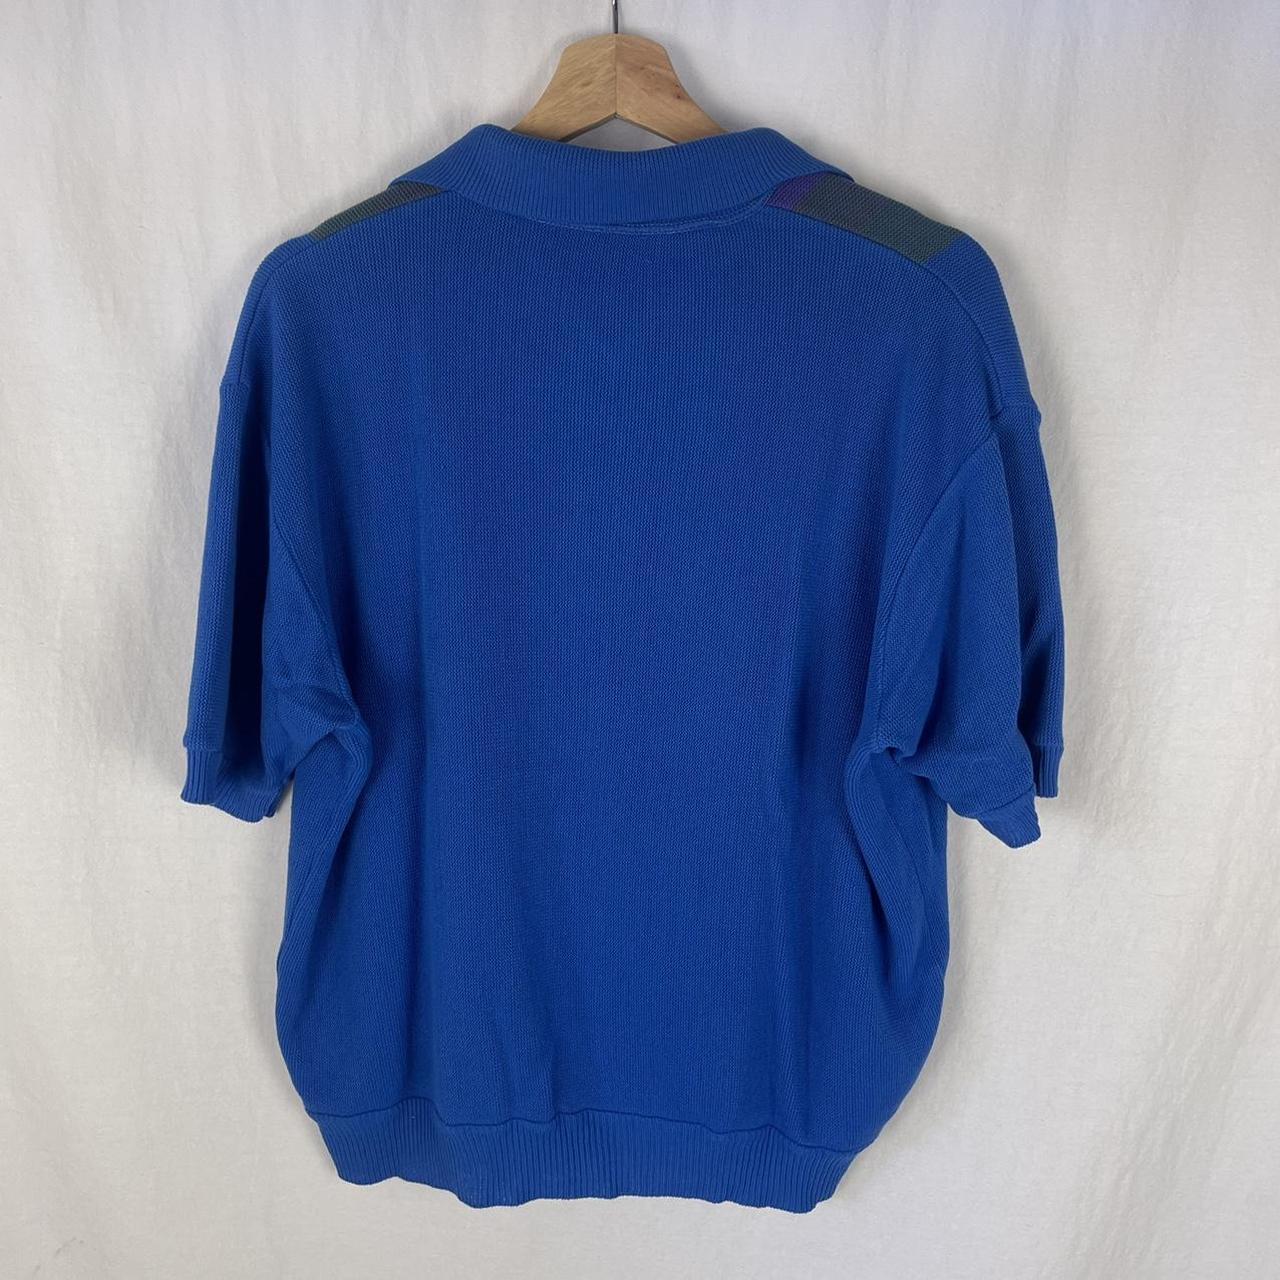 Vintage 70s Knit Polo Shirt Size XL Blue and... - Depop